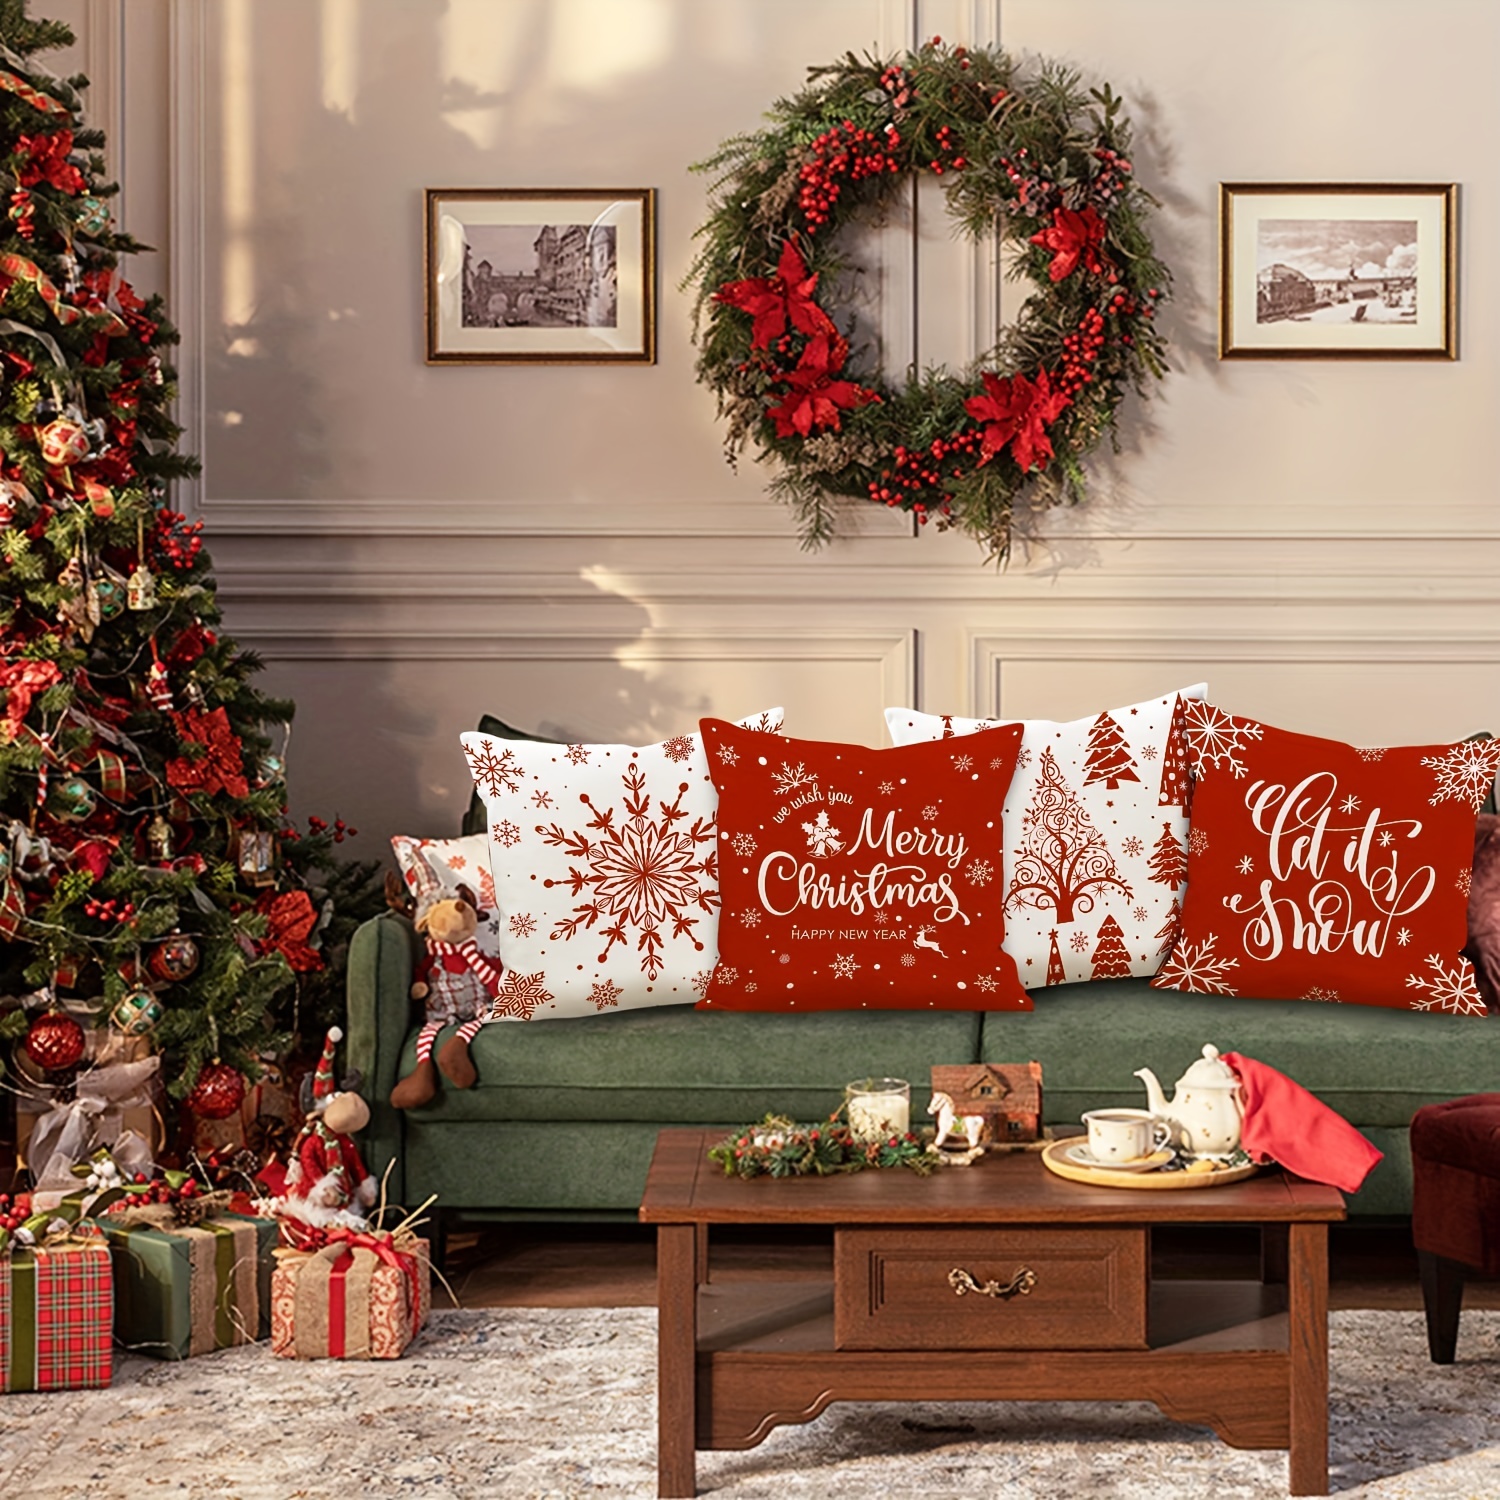 Christmas Pillow Covers 18x18 Set of 2 Red Christmas Decorations Indoor  Home Decor Farmhouse Decorative Throw Pillows for Living Room Xmas Wreath  Deer Winter Holiday Outdoor Sofa Couch Bedroom